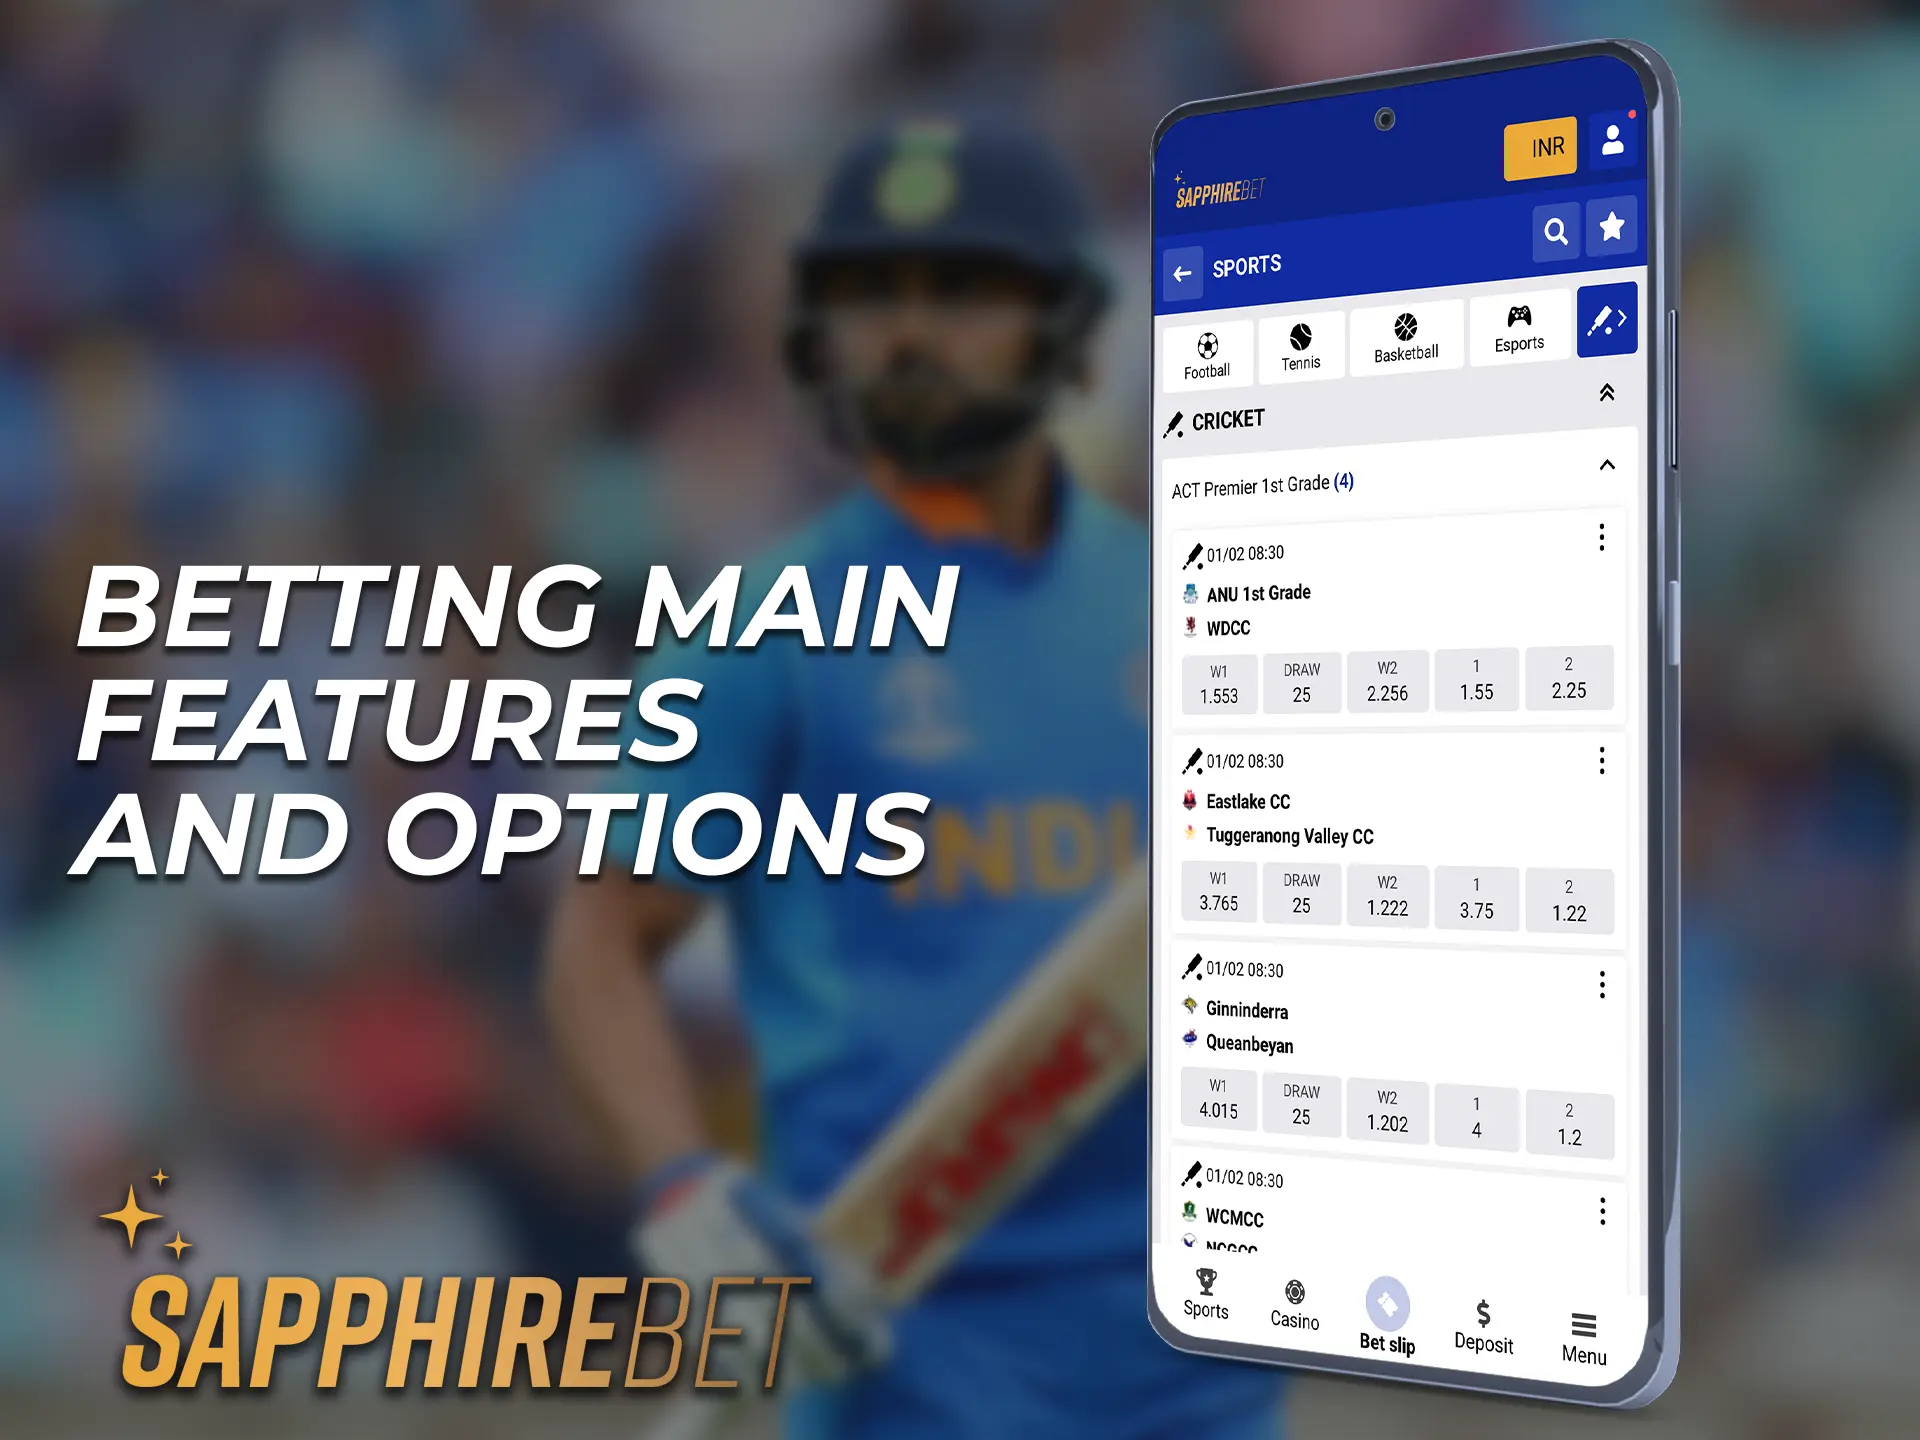 SapphireBet offers a range of betting features and options on the app.